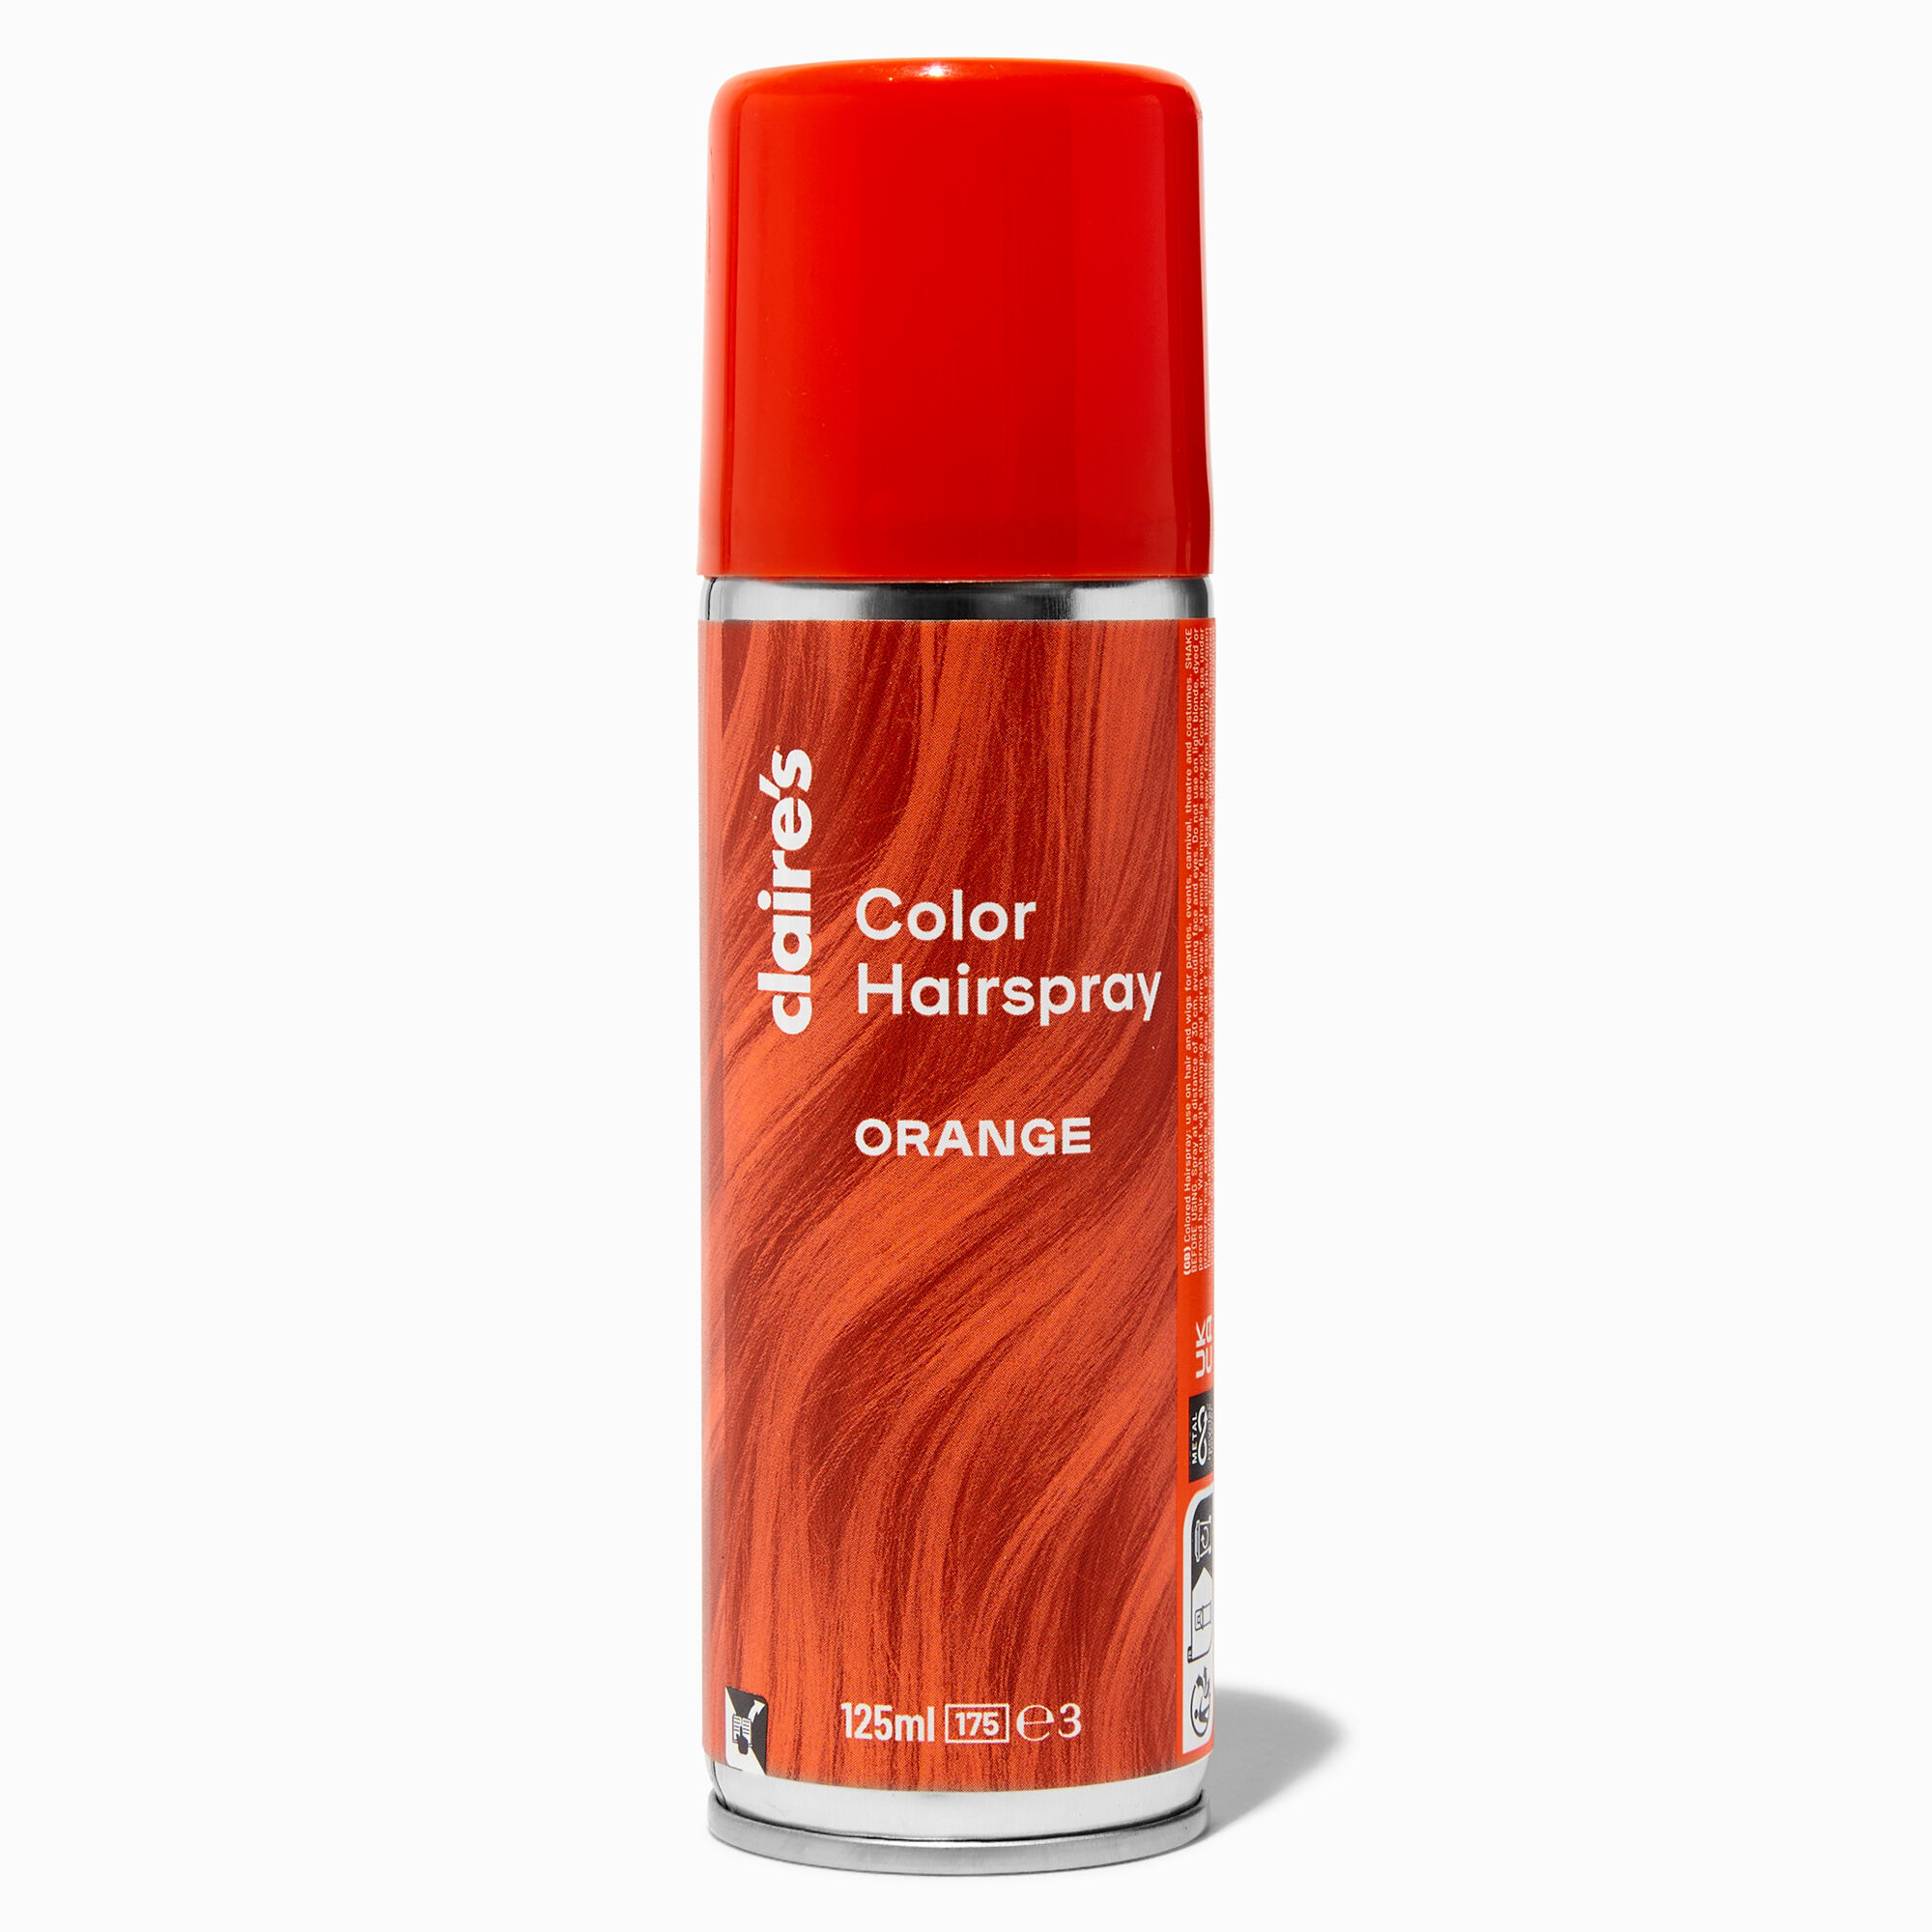 View Claires Colour Hairspray Orange information